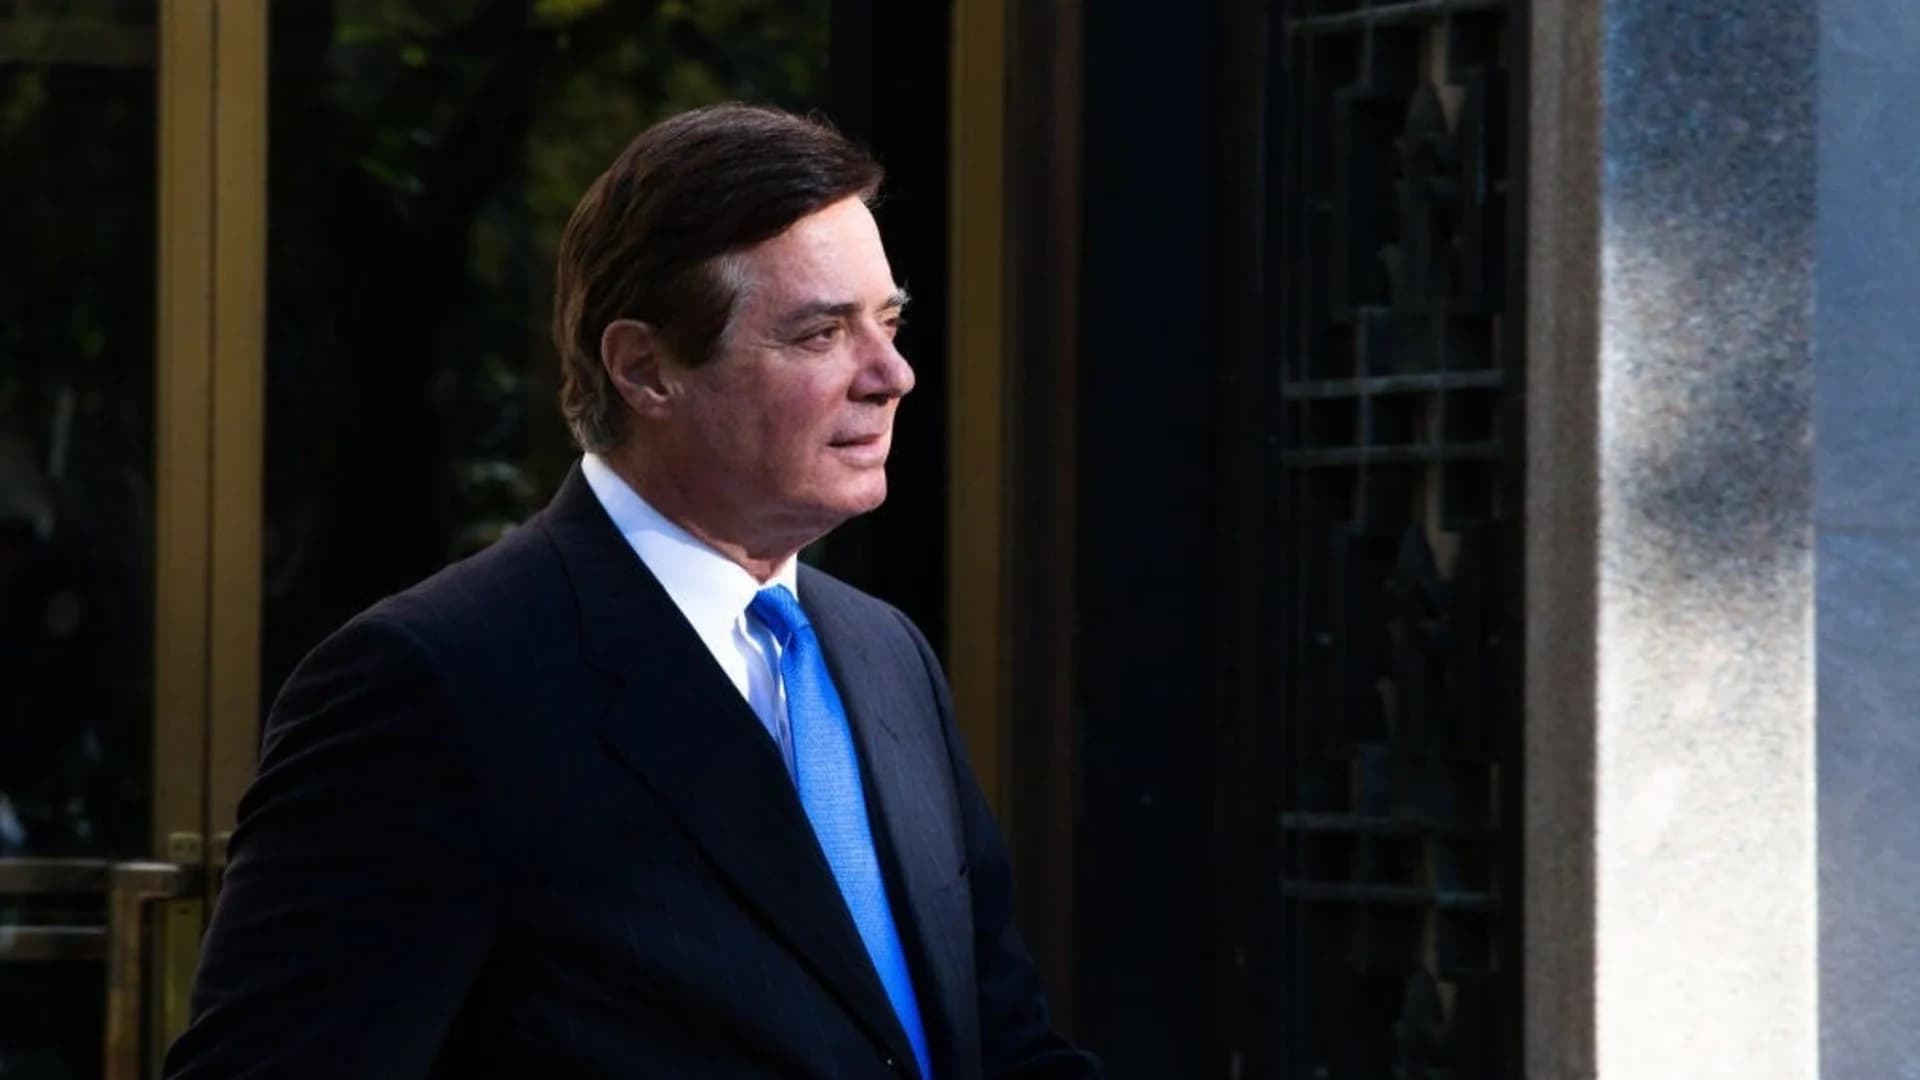 Ex-Trump campaign chairman Paul Manafort guilty of 8 charges